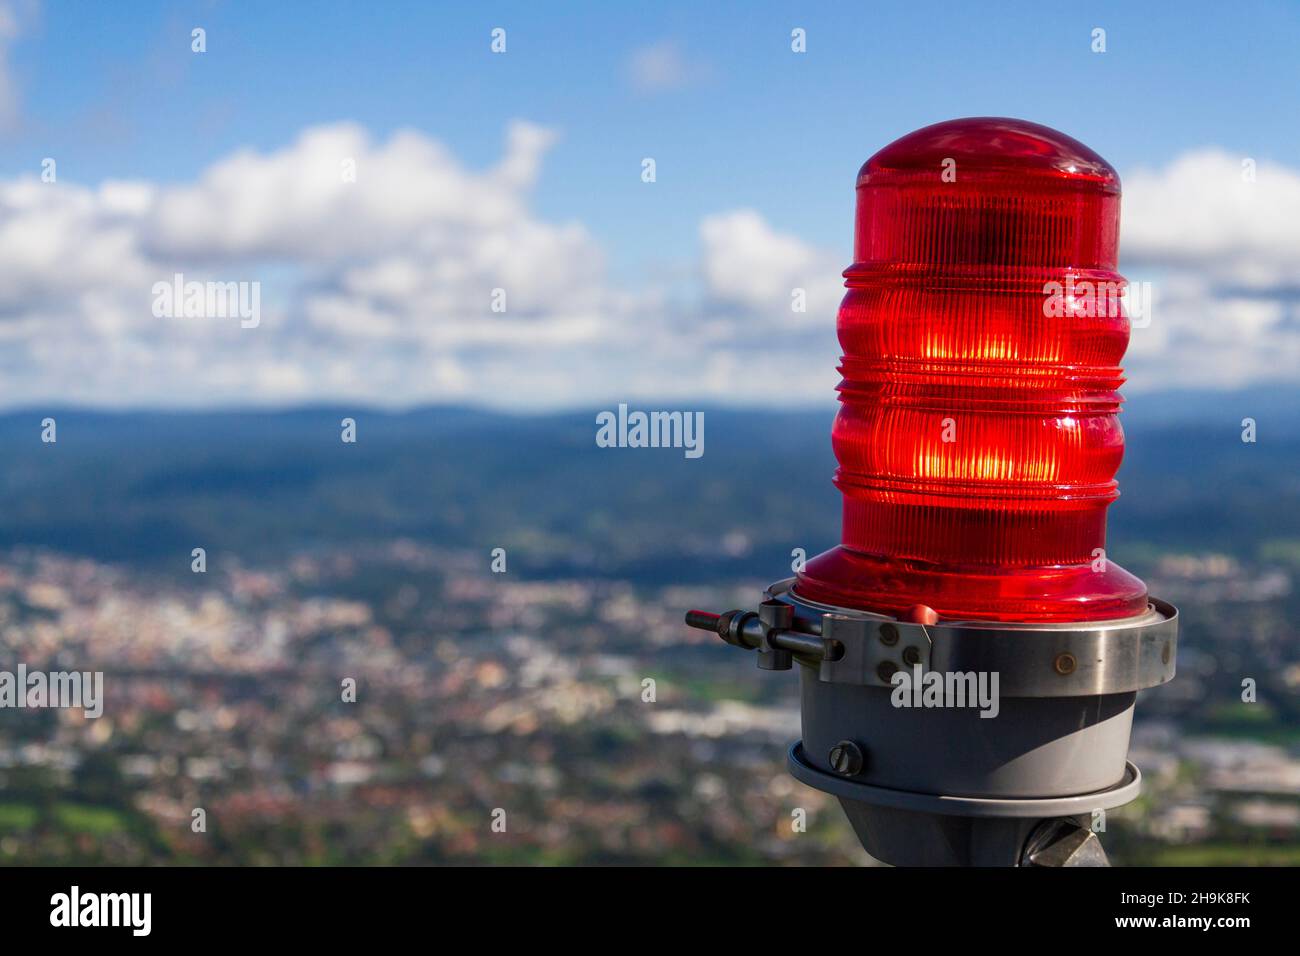 Red warning lights for air traffic on roof of high building, airport lighting equipment, daylight Stock Photo